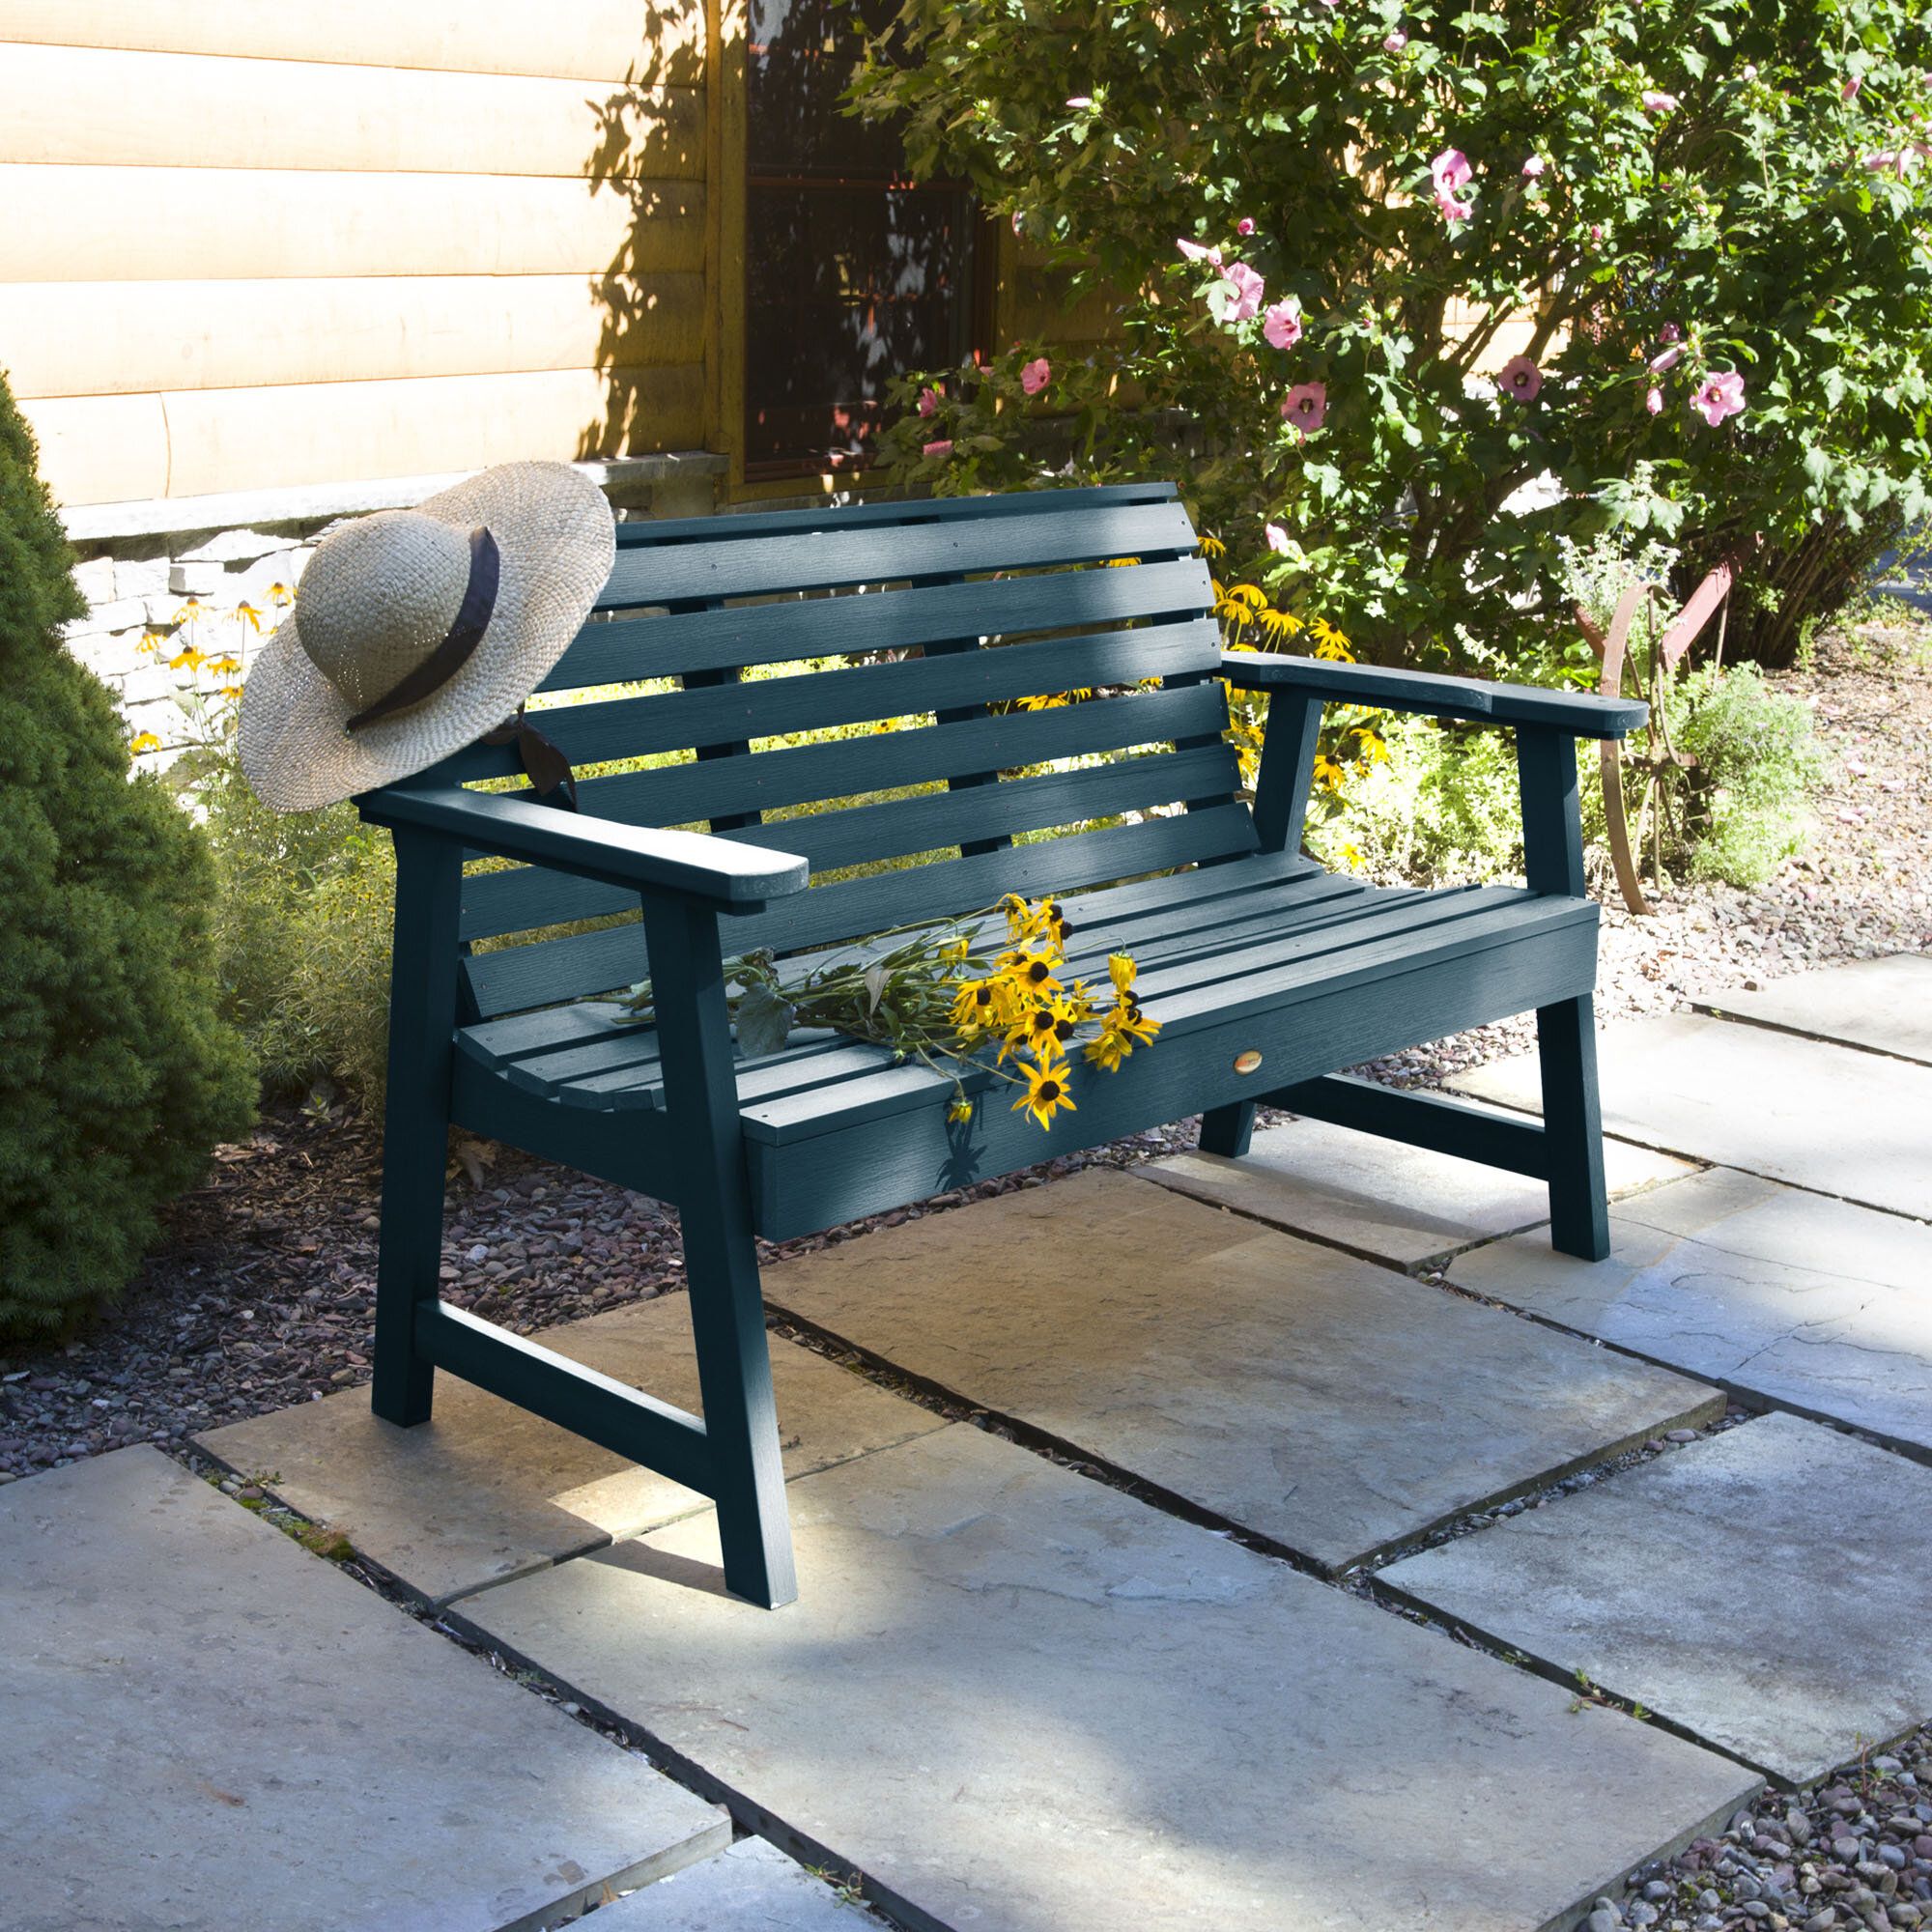 Trigg Synthetic Plastic Garden Bench Intended For Gehlert Traditional Patio Iron Garden Benches (View 19 of 25)